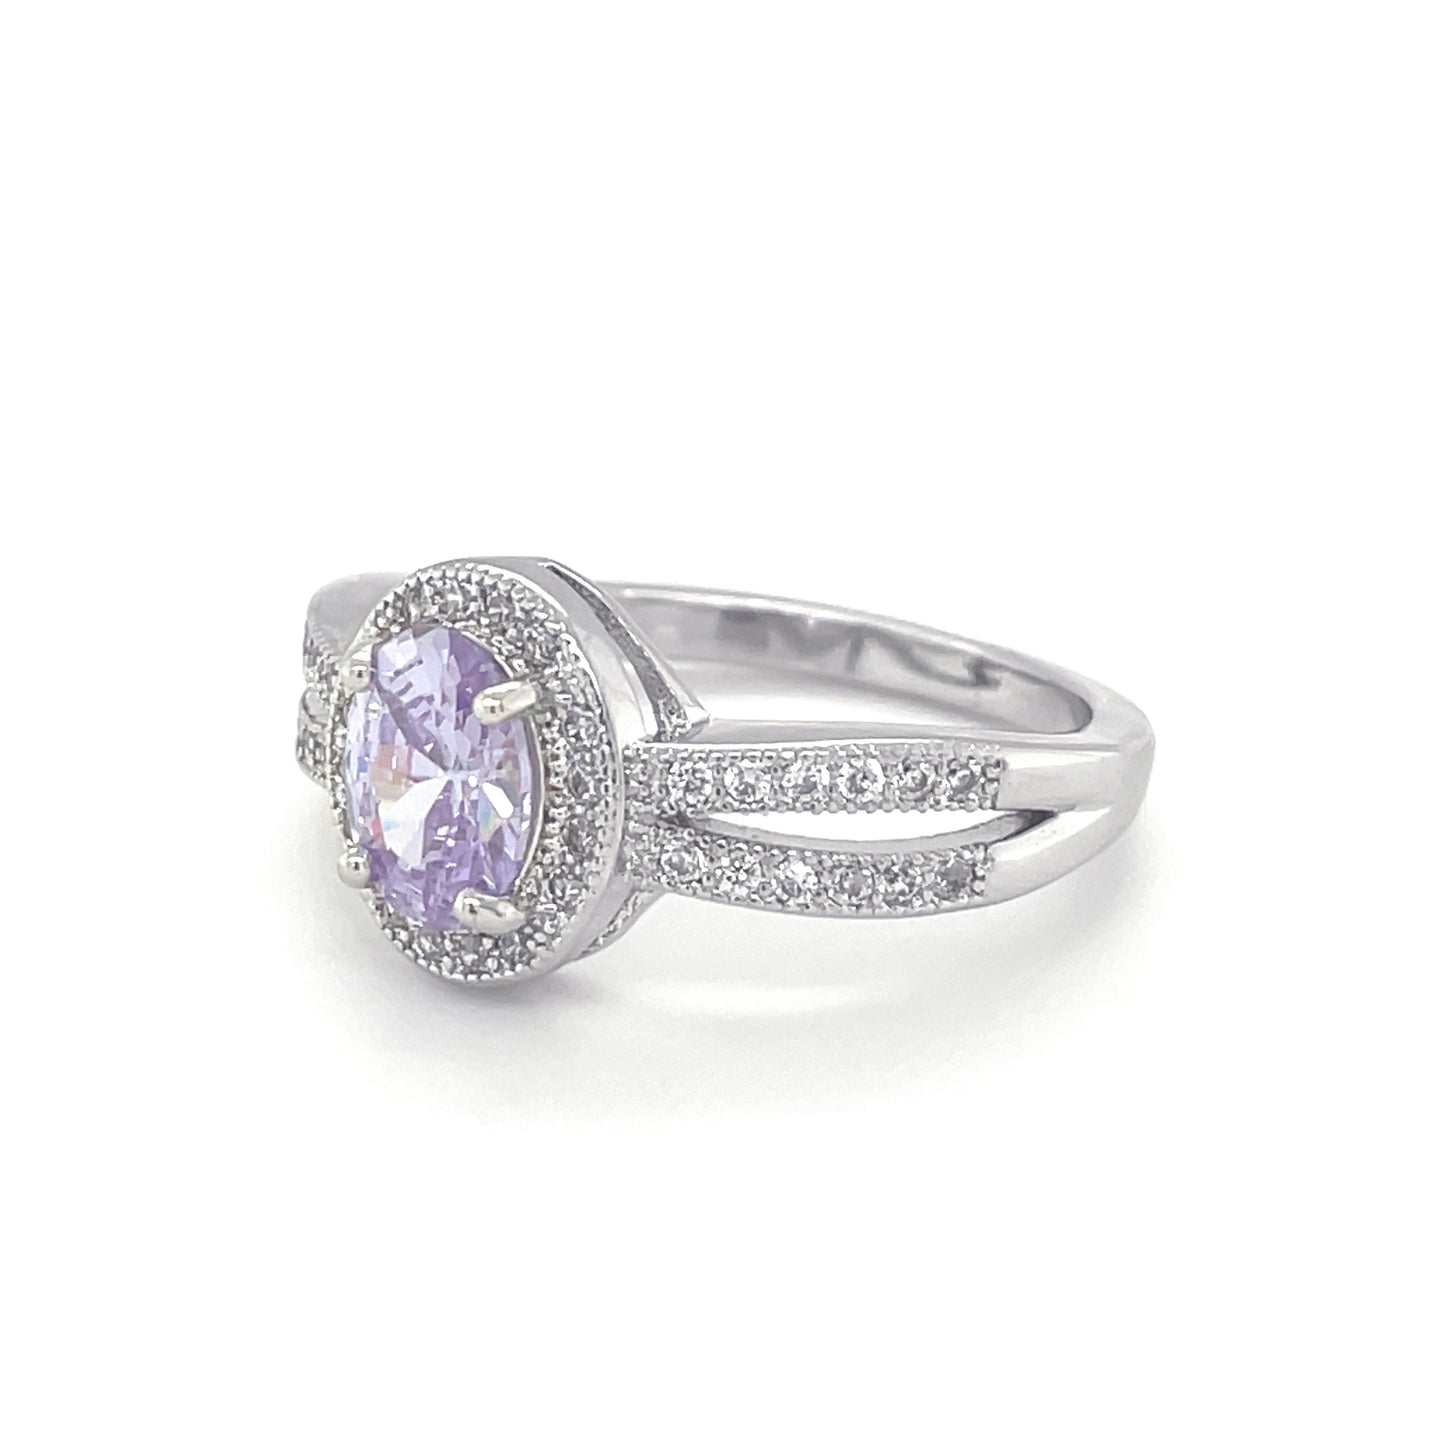 BMR84632CB - Oval Cut Halo - Engagemet Ring